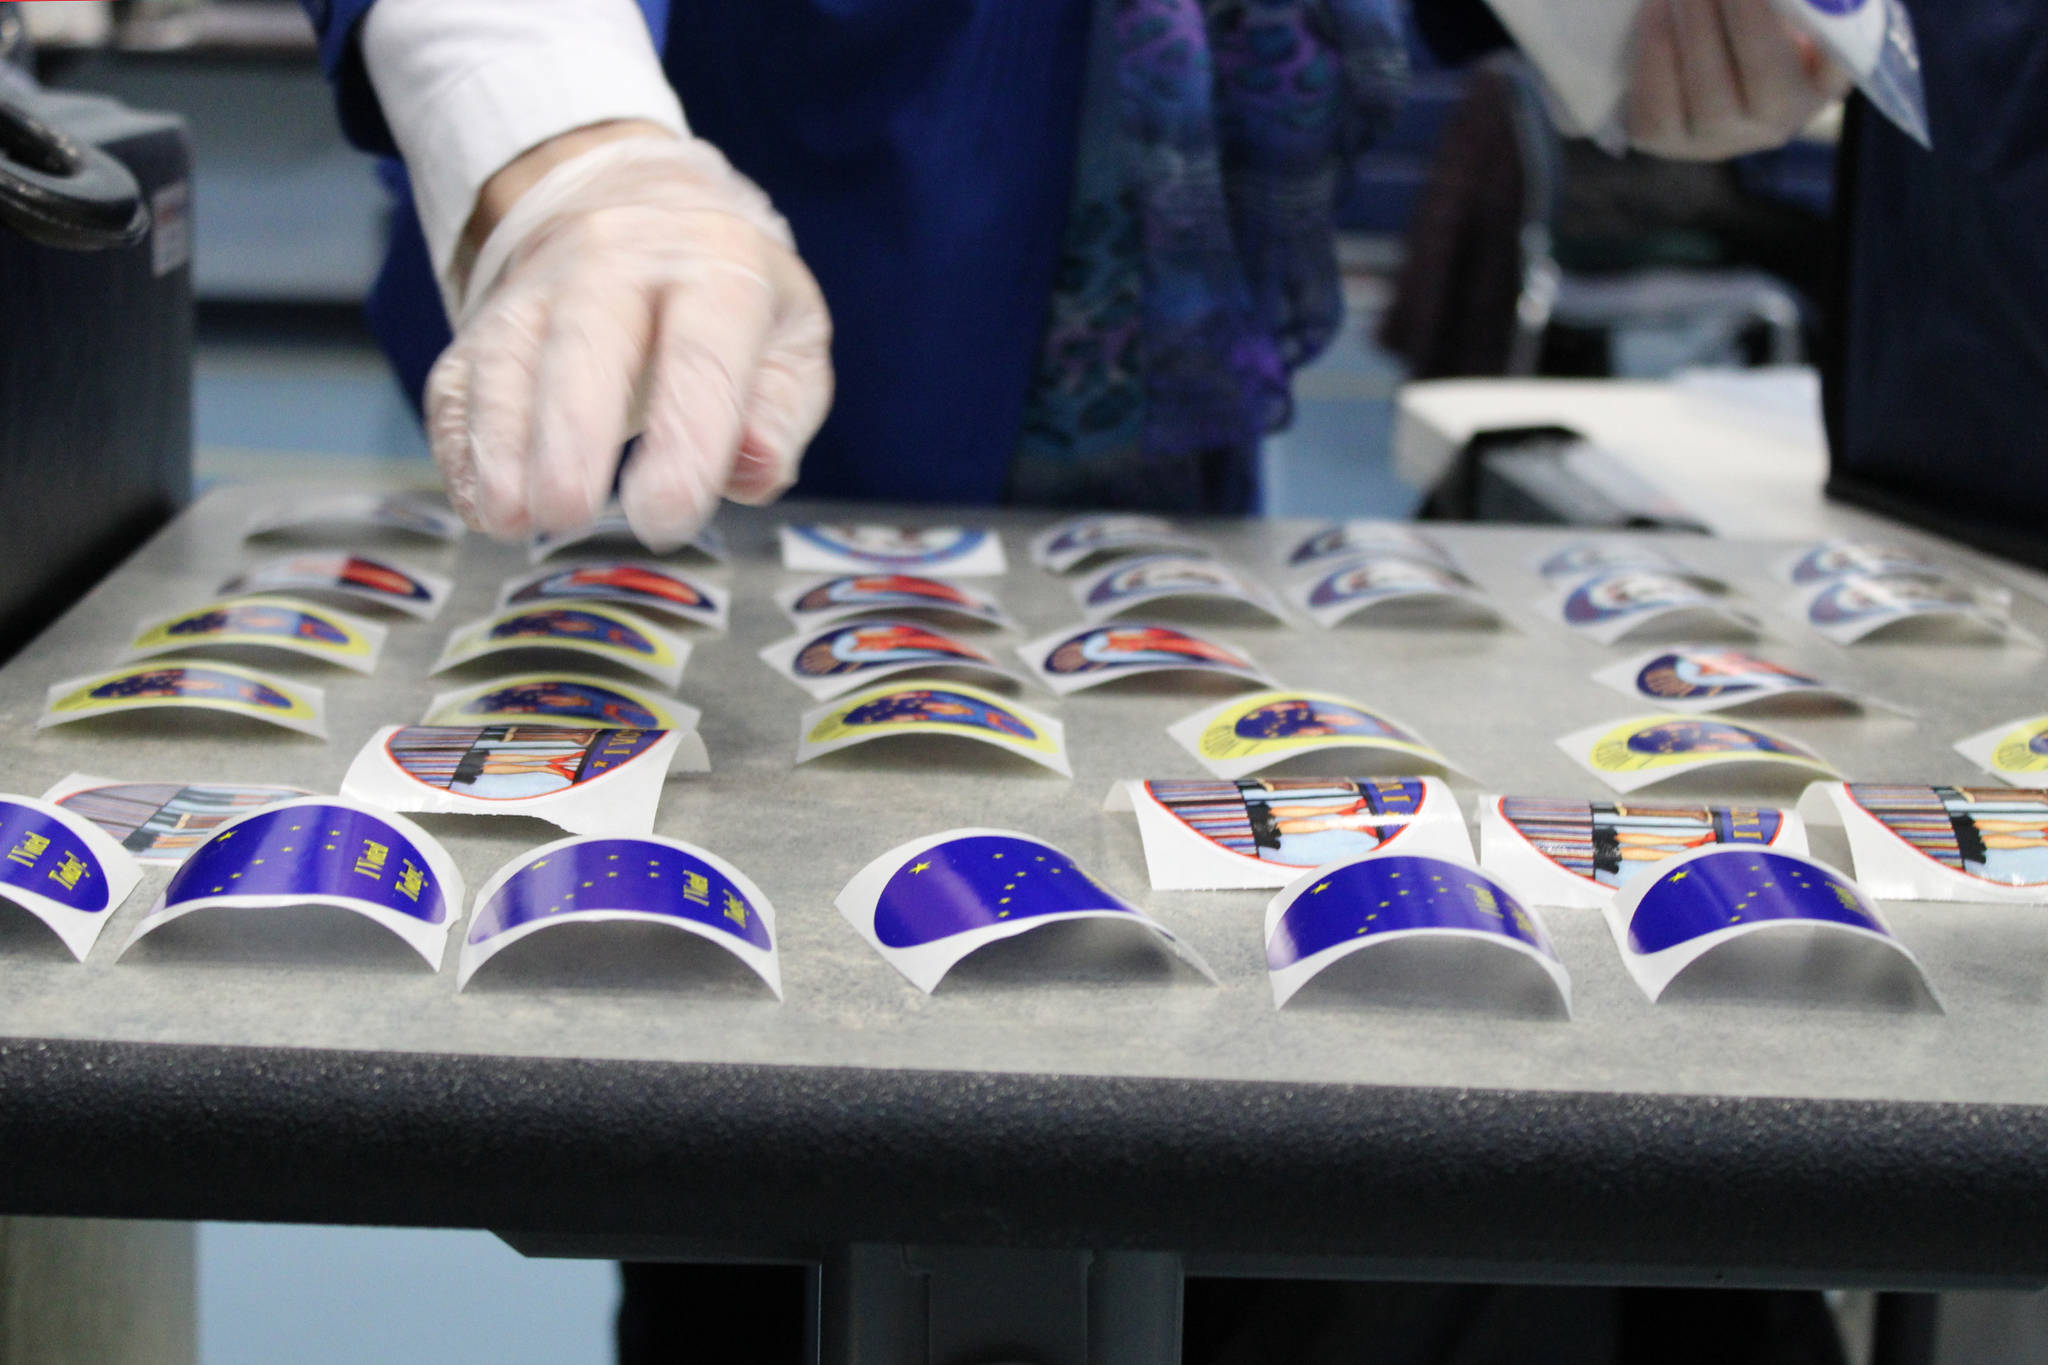 An election official lays out more “I voted” stickers on Tuesday, Nov. 3. Stickers for the 2020 general election featured designs by Alaskan artist Barbara Lavallee. (Ben Hohenstatt / Juneau Empire File)